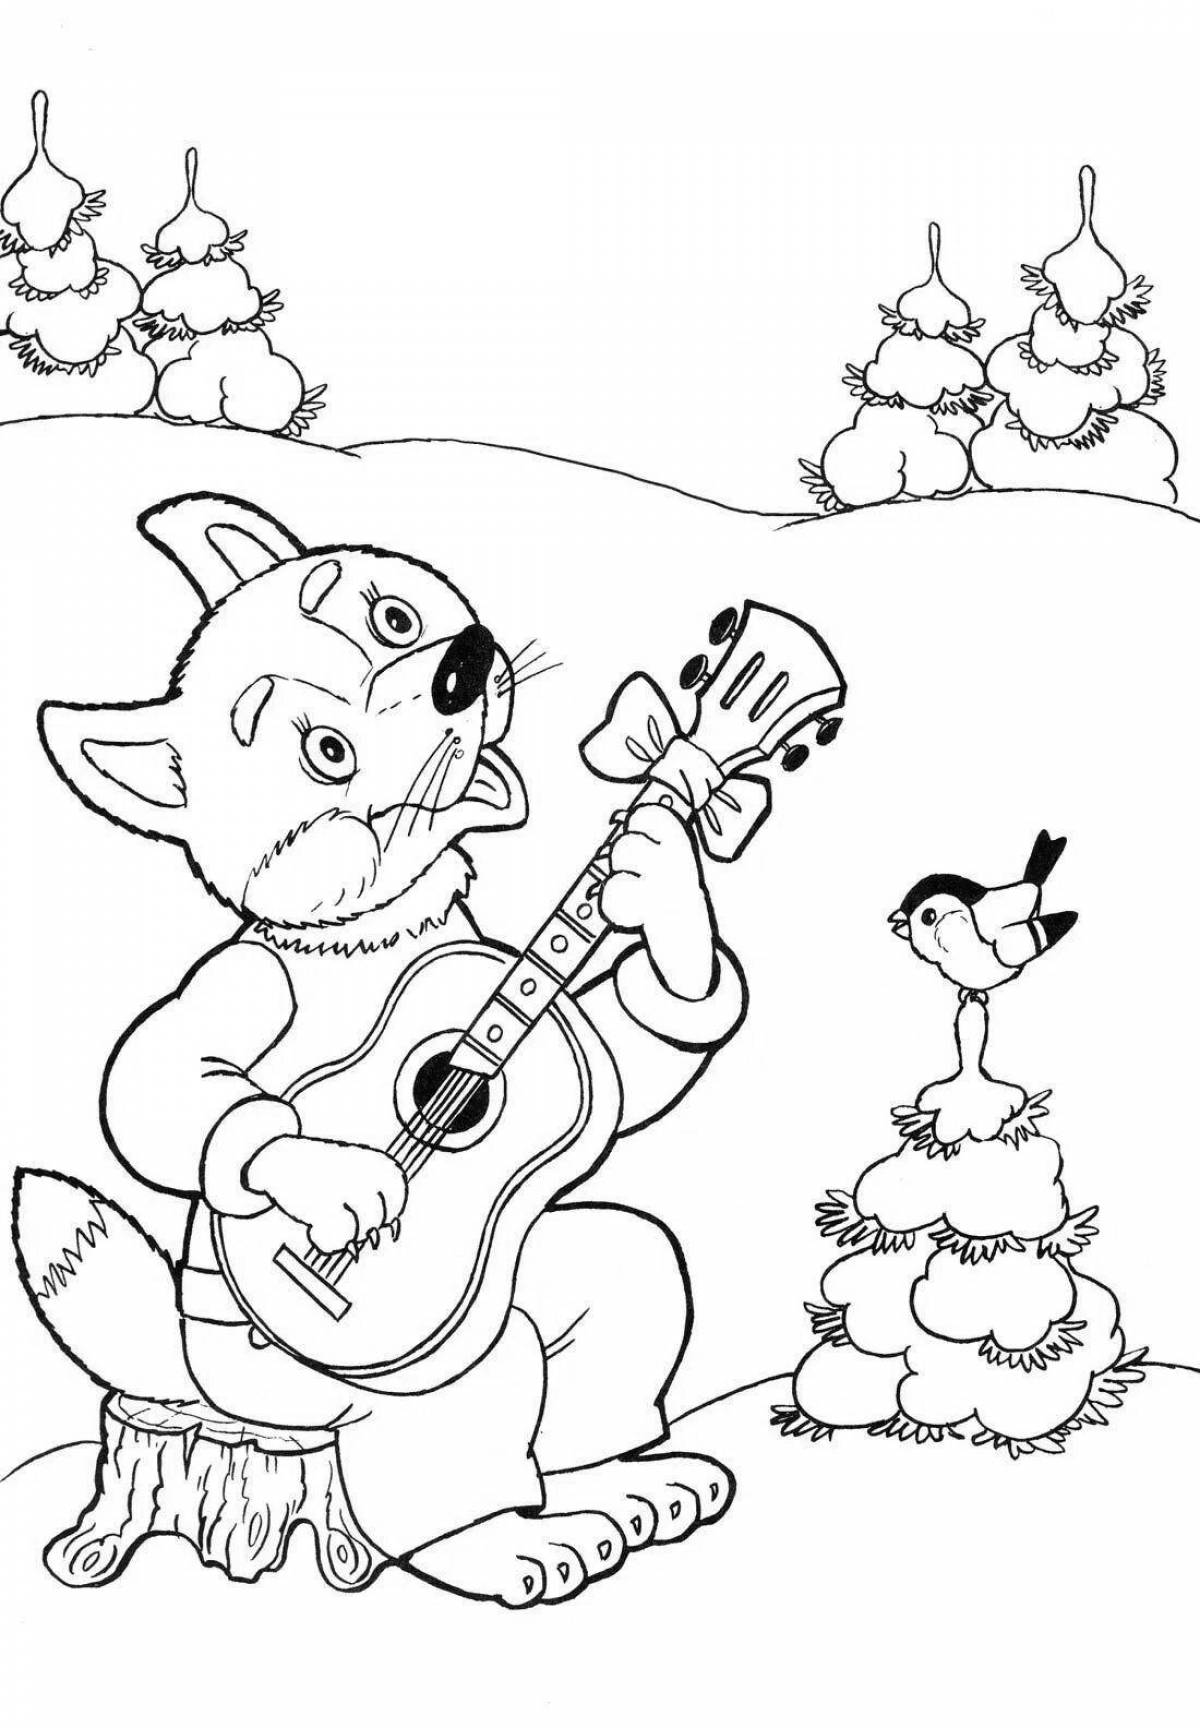 Dynamic Christmas wolf coloring book